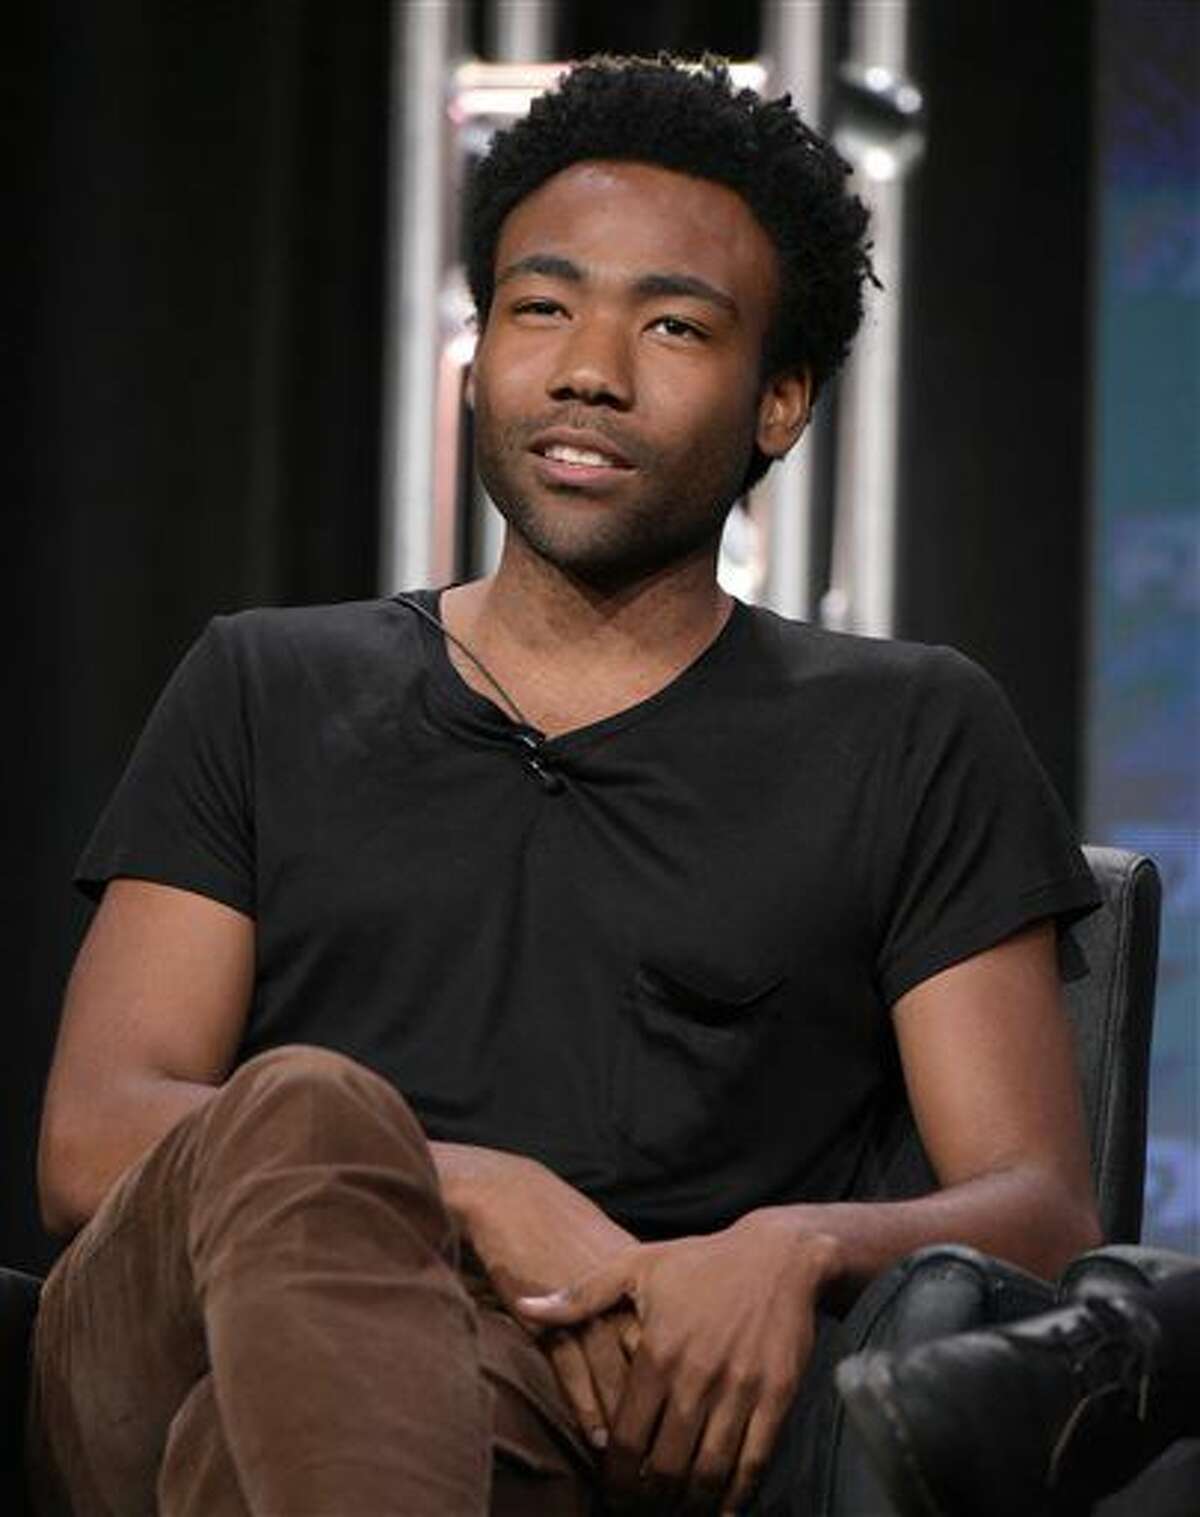 Donald Glover participates in the "Atlanta" panel during the FX Television Critics Association summer press tour on Tuesday, Aug. 9, 2016, in Beverly Hills, Calif. (Photo by Richard Shotwell/Invision/AP)